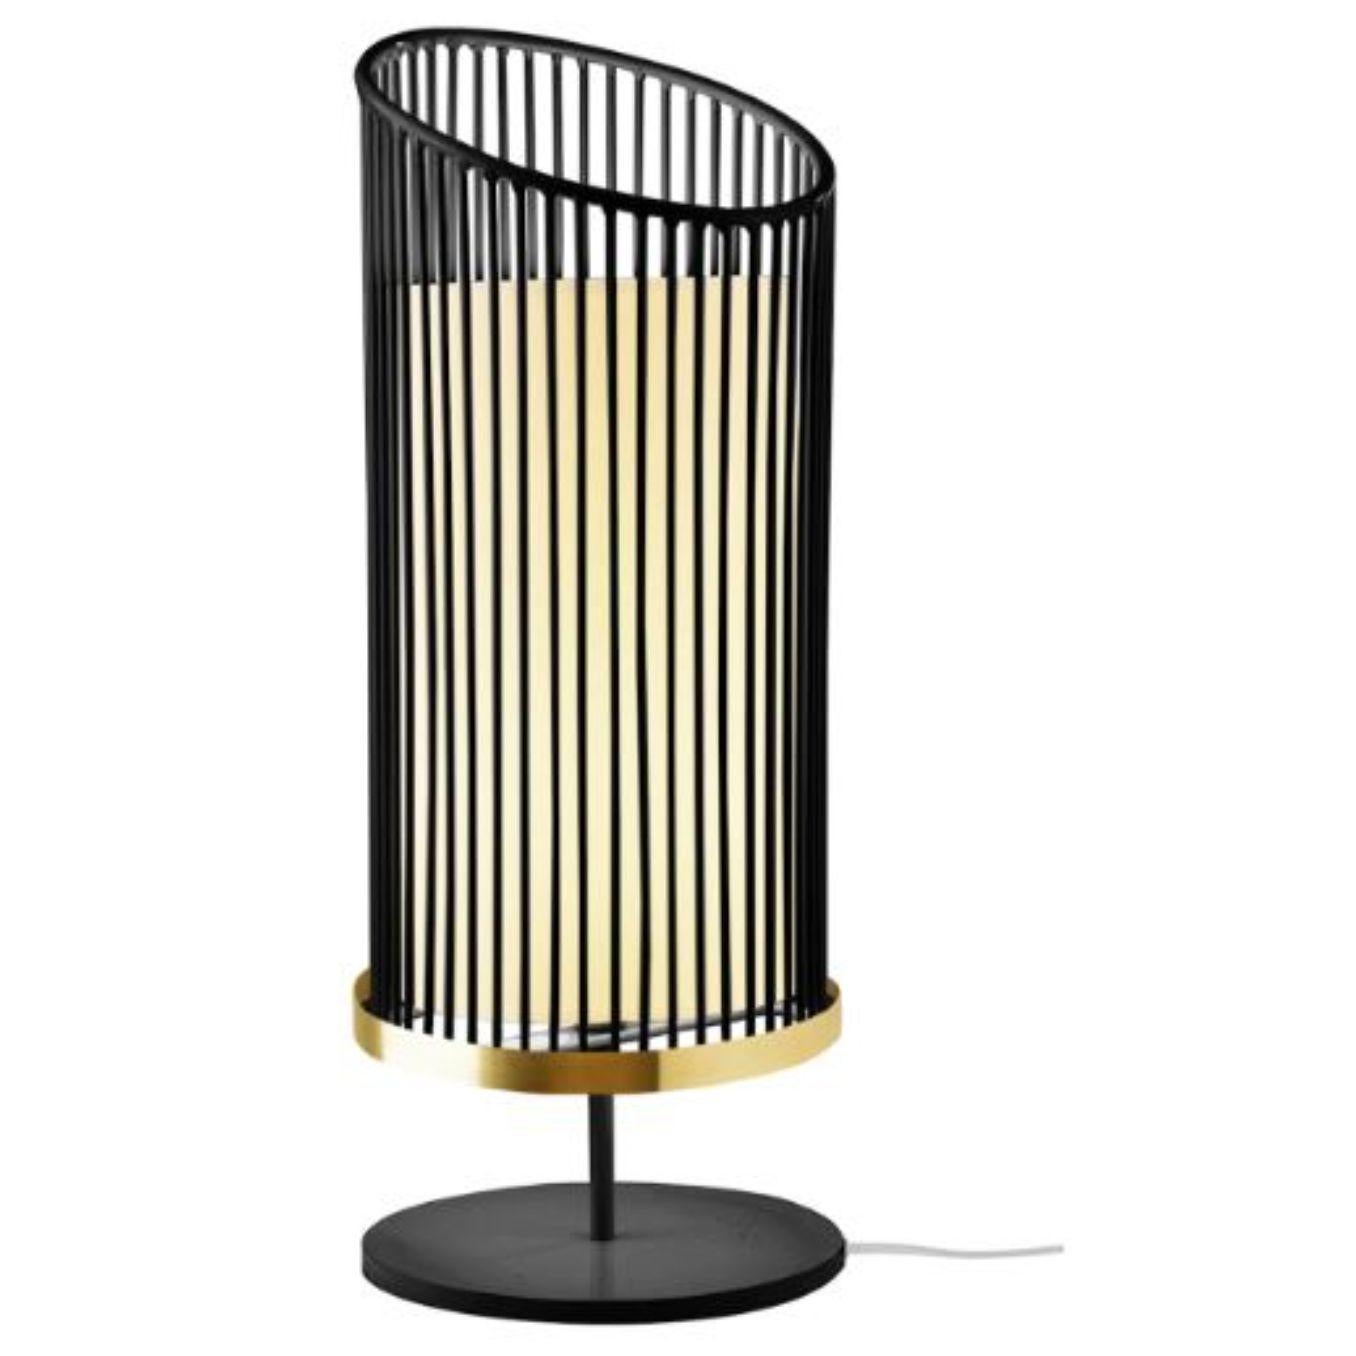 Black new spider table lamp with brass ring by Dooq.
Dimensions: W 24 x D 24 x H 60 cm.
Materials: lacquered metal, polished or brushed metal, brass.
Also available in different colors and materials. 

Information:
230V/50Hz
E27/1x20W